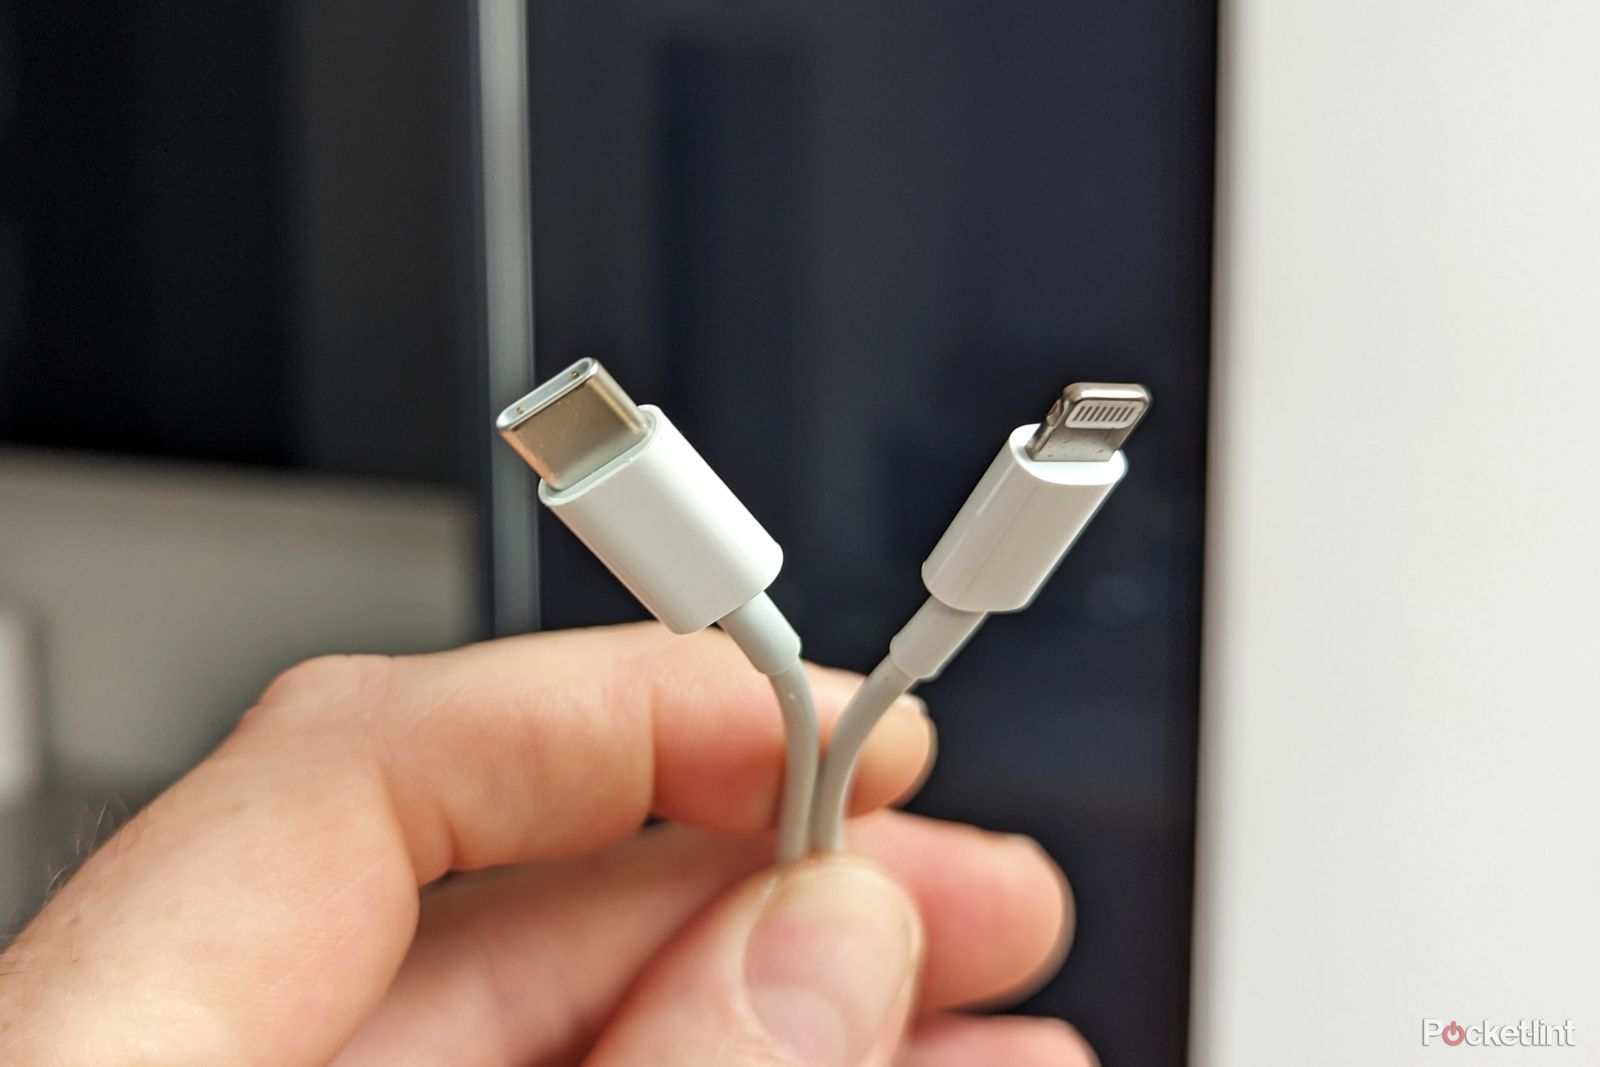 USB-C and Lightning connectors side by side